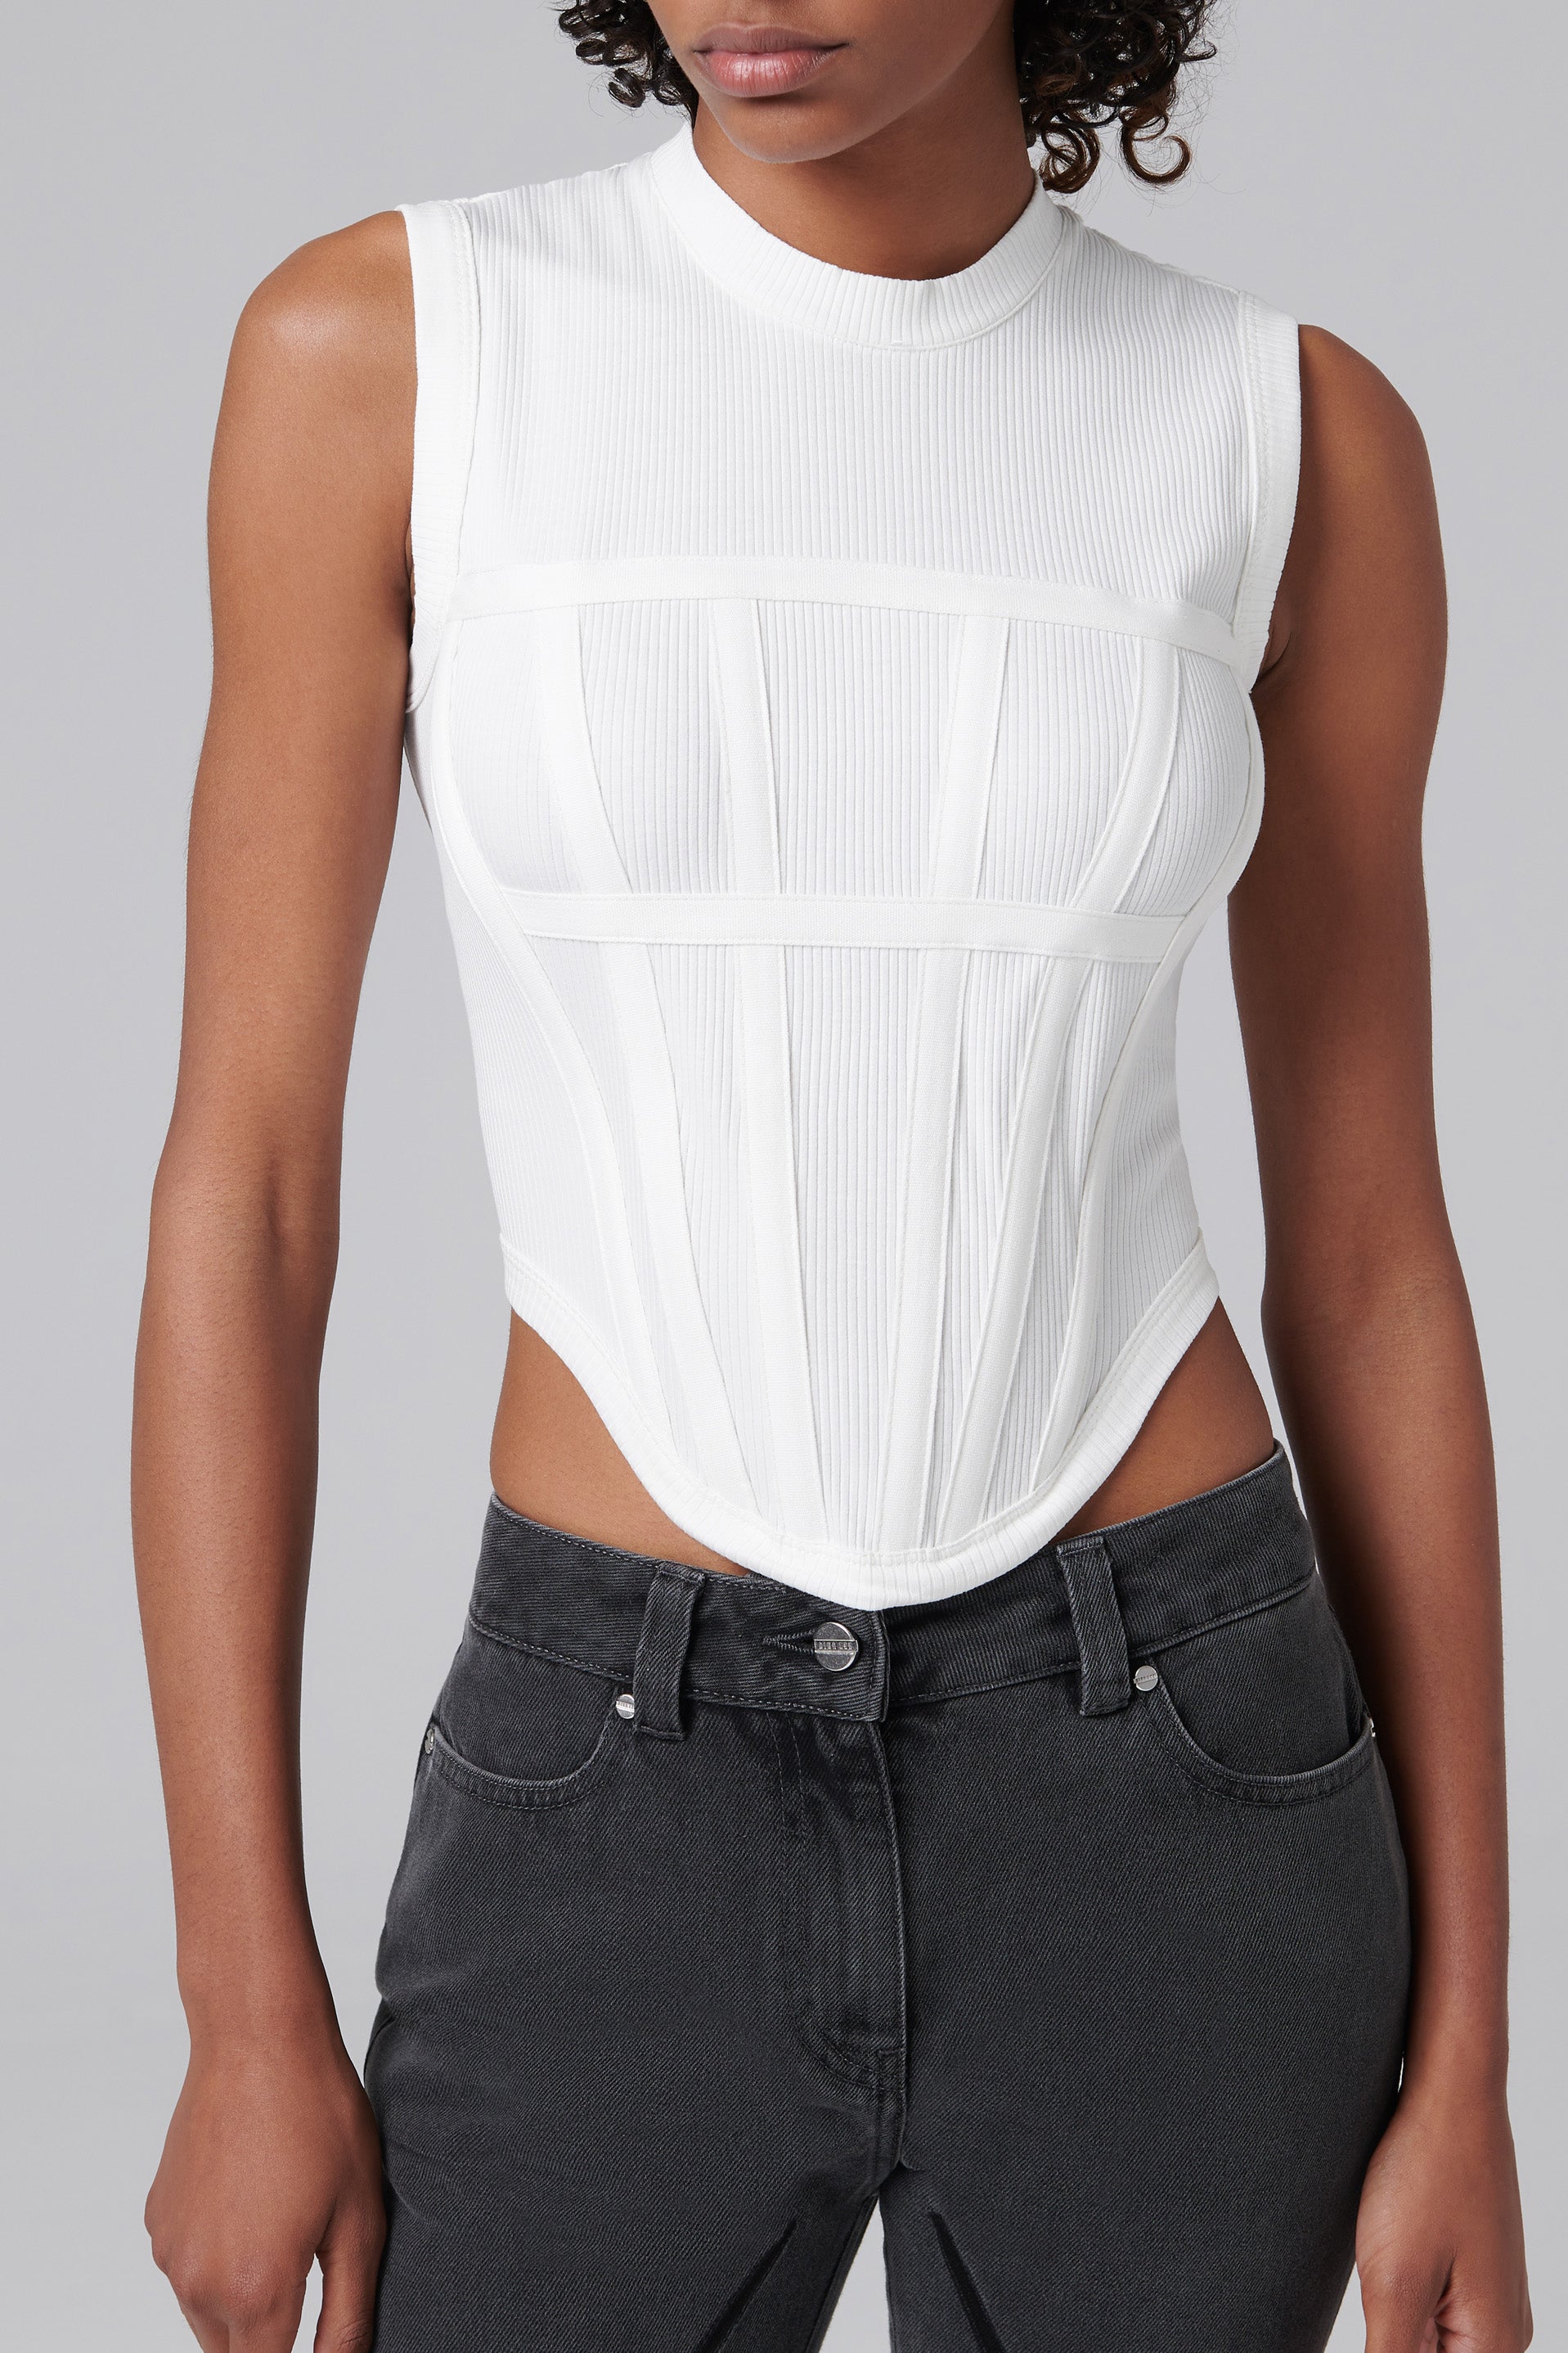 Dion Lee White Rib Corset Tank Top - Fabric of Society